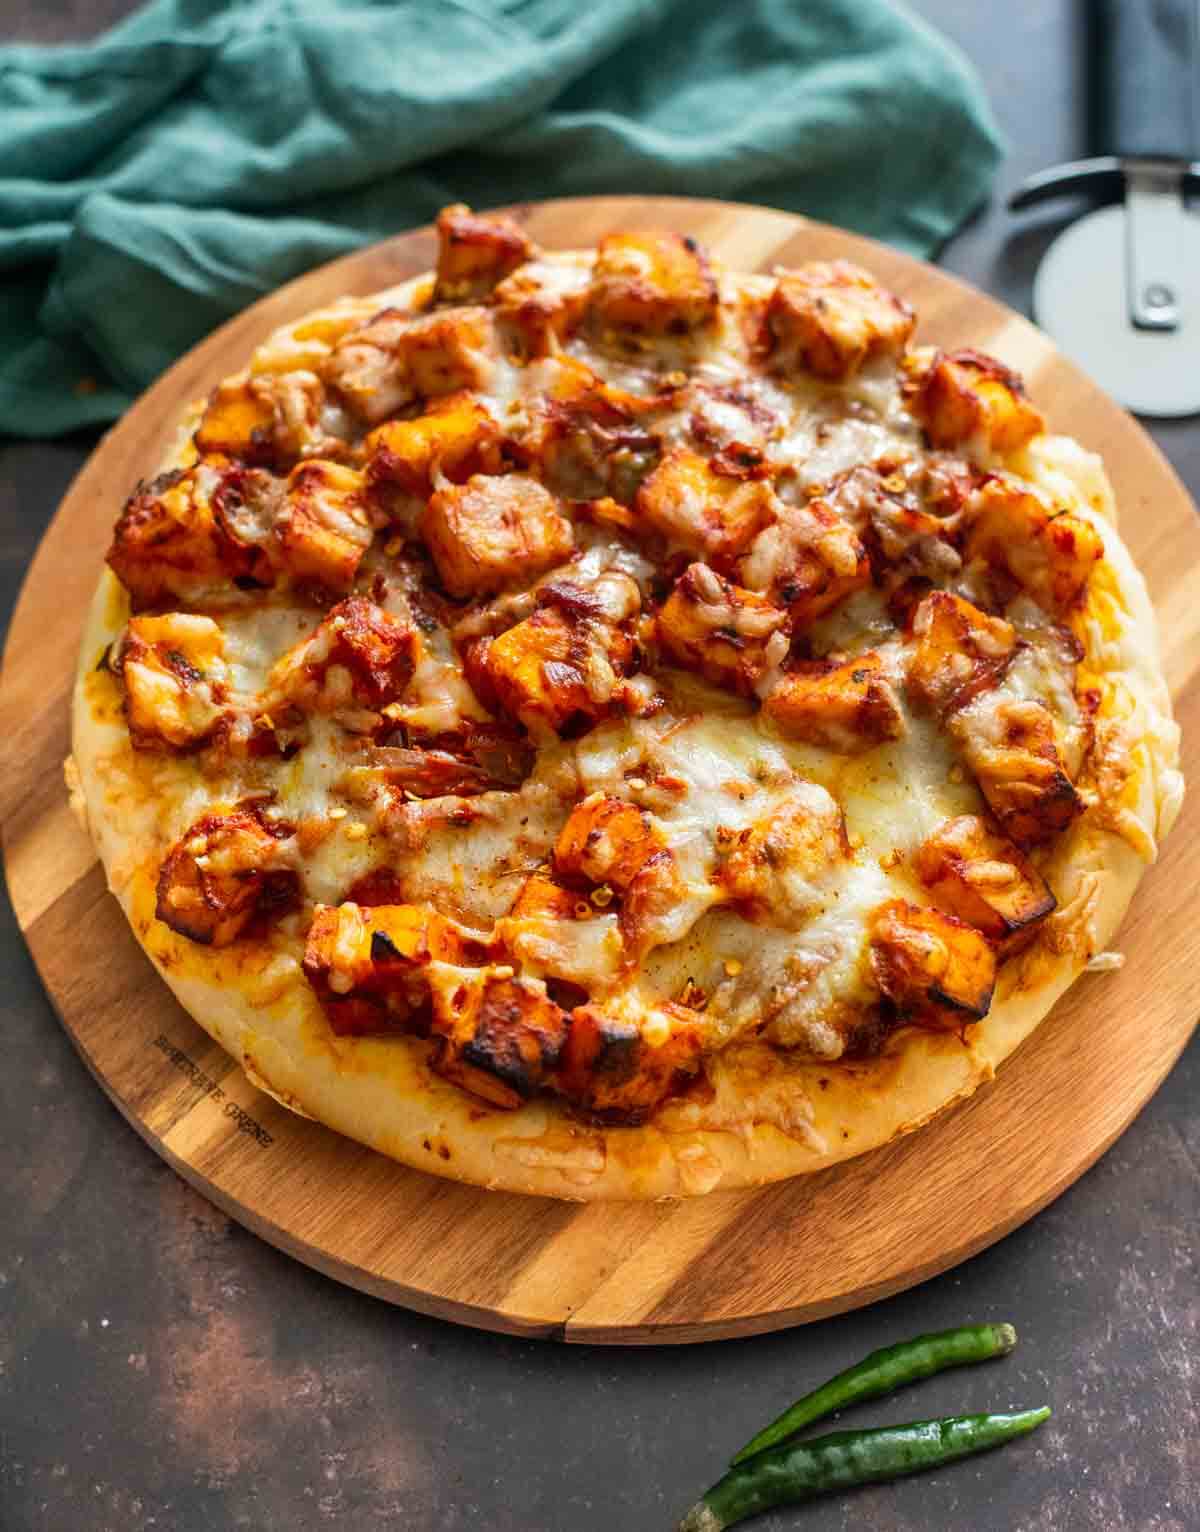 round pizza with paneer and tomato sauc etopping on a wooden board